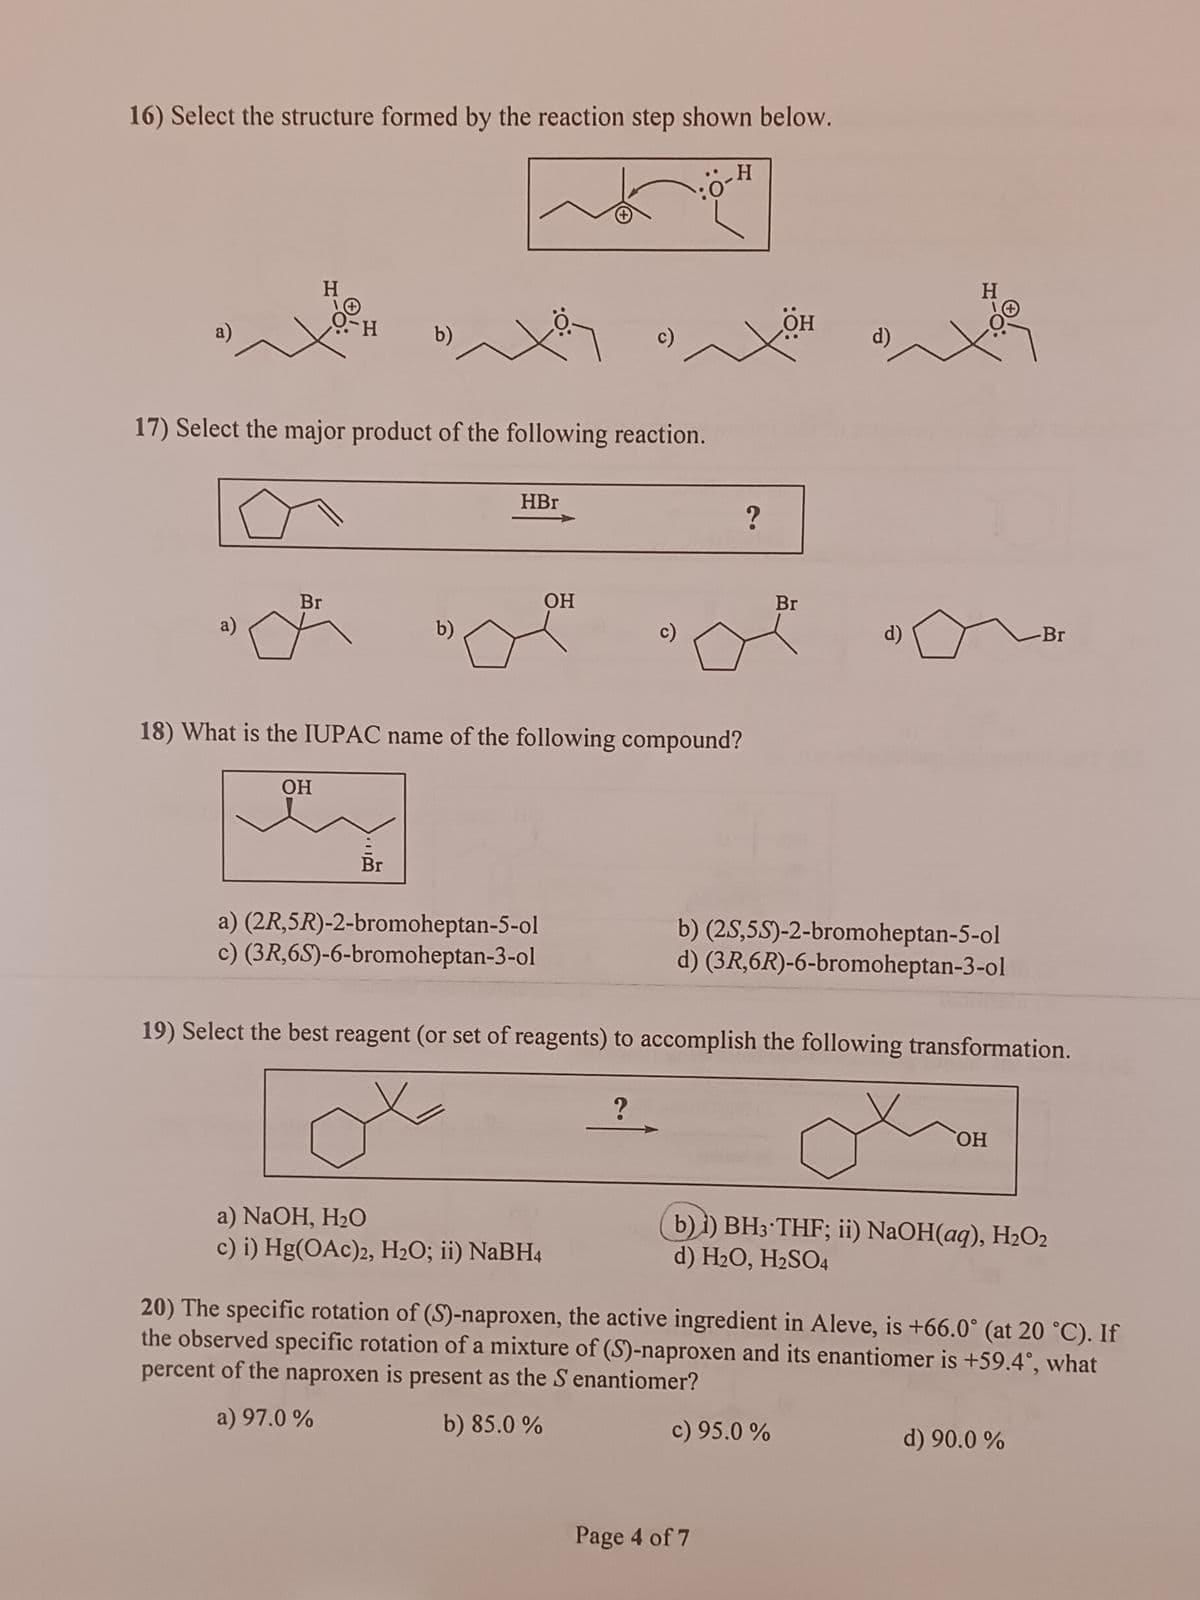 16) Select the structure formed by the reaction step shown below.
a)
a)
H
Br
O-H
OH
b)
17) Select the major product of the following reaction.
b)
НВг
a) (2R,5R)-2-bromoheptan-5-ol
c) (3R,6S)-6-bromoheptan-3-ol
OH
c)
18) What is the IUPAC name of the following compound?
a) NaOH, H₂O
c) i) Hg(OAc)2, H₂O; ii) NaBH4
0
?
H
?
OH
Page 4 of 7
Br
d)
b) (2S,5S)-2-bromoheptan-5-ol
d) (3R,6R)-6-bromoheptan-3-ol
19) Select the best reagent (or set of reagents) to accomplish the following transformation.
c) 95.0%
H
ОН
b) i) BH3 THF; ii) NaOH(aq), H₂O2
d) H₂O, H₂SO4
Br
20) The specific rotation of (S)-naproxen, the active ingredient in Aleve, is +66.0° (at 20 °C). If
the observed specific rotation of a mixture of (S)-naproxen and its enantiomer is +59.4°, what
percent of the naproxen is present as the S enantiomer?
a) 97.0 %
b) 85.0 %
d) 90.0%